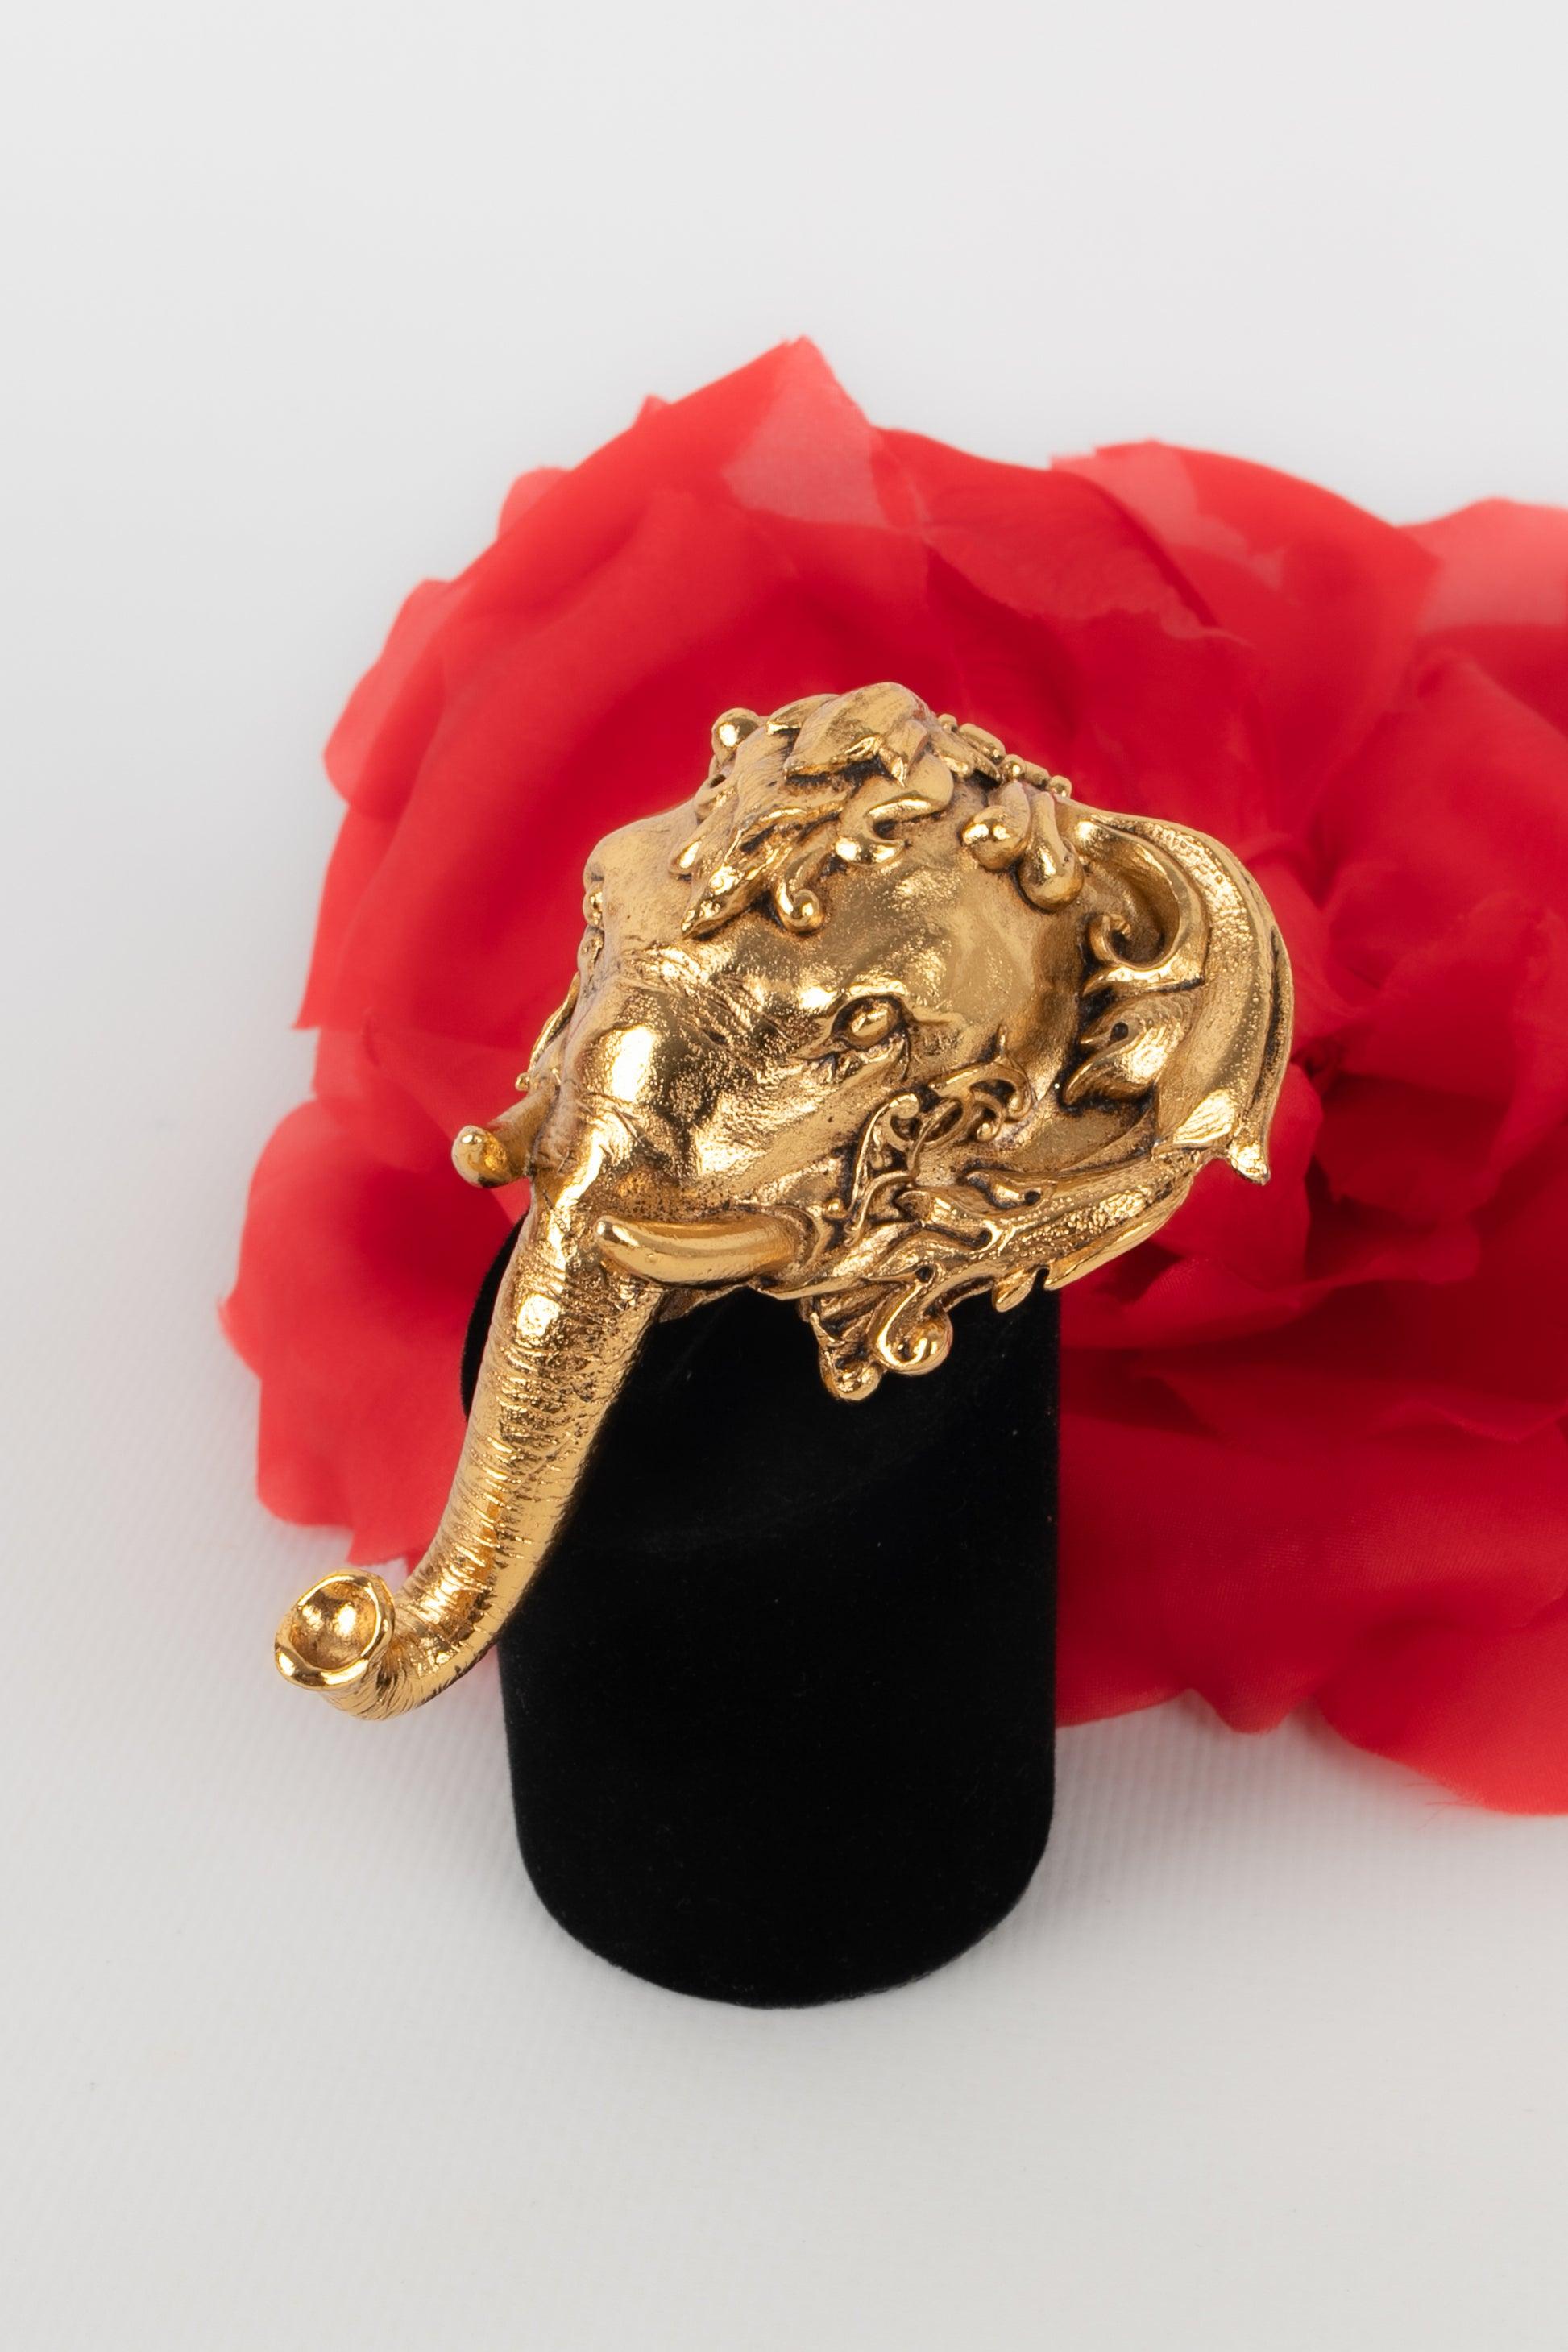 Christian Dior Gold-Plated Metal Pendant Brooch Depicting an Elephant Head For Sale 4